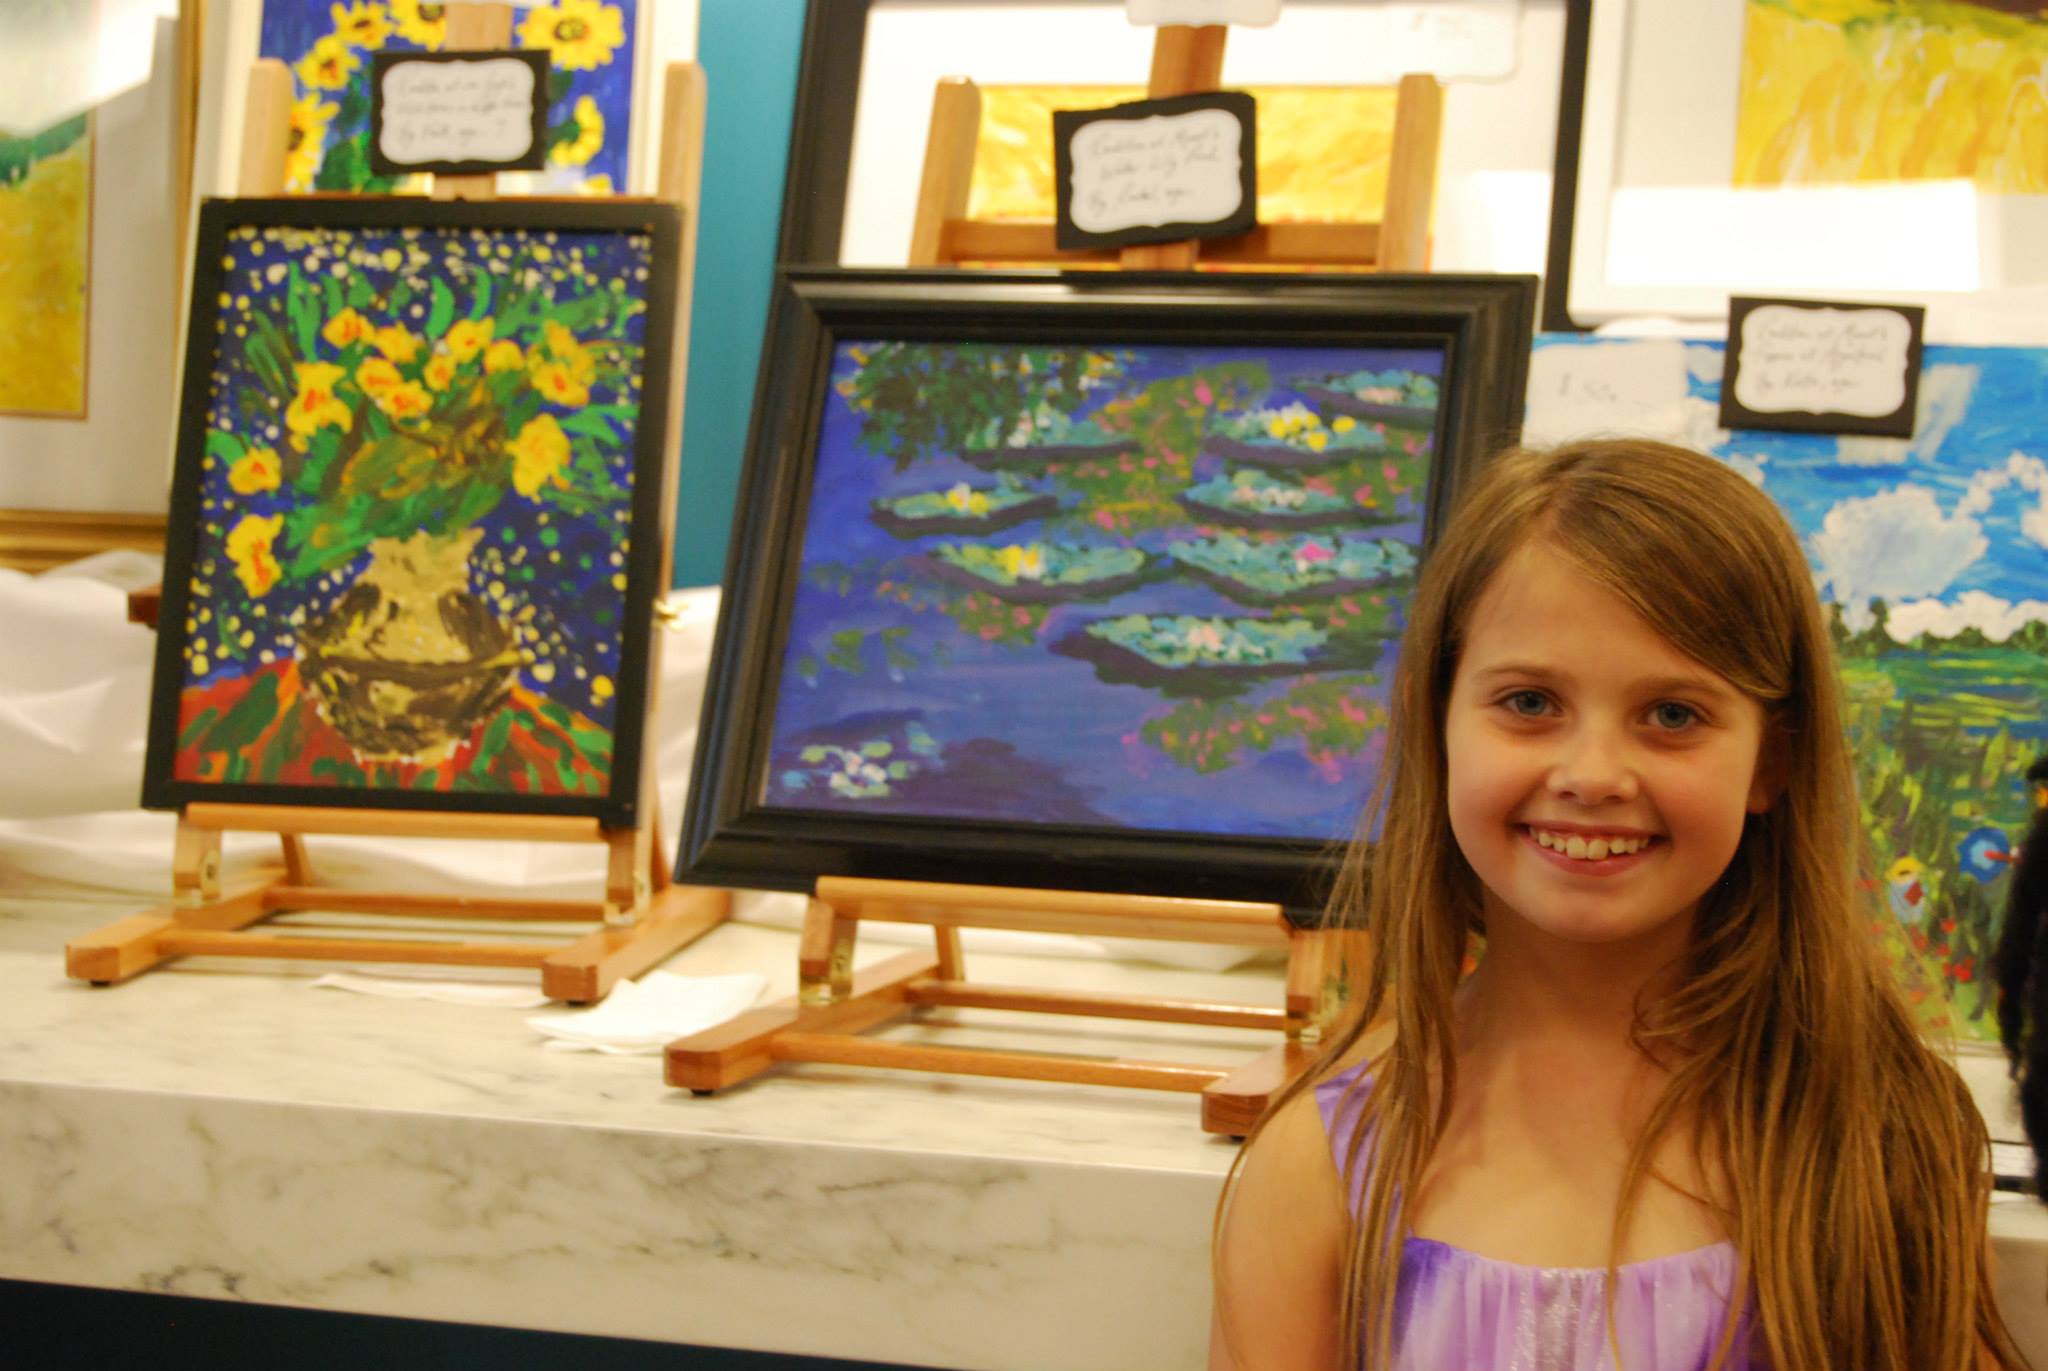 Rachel enjoys seeing her masterpieces displayed at the United Nations building!  She felt honored to help other children